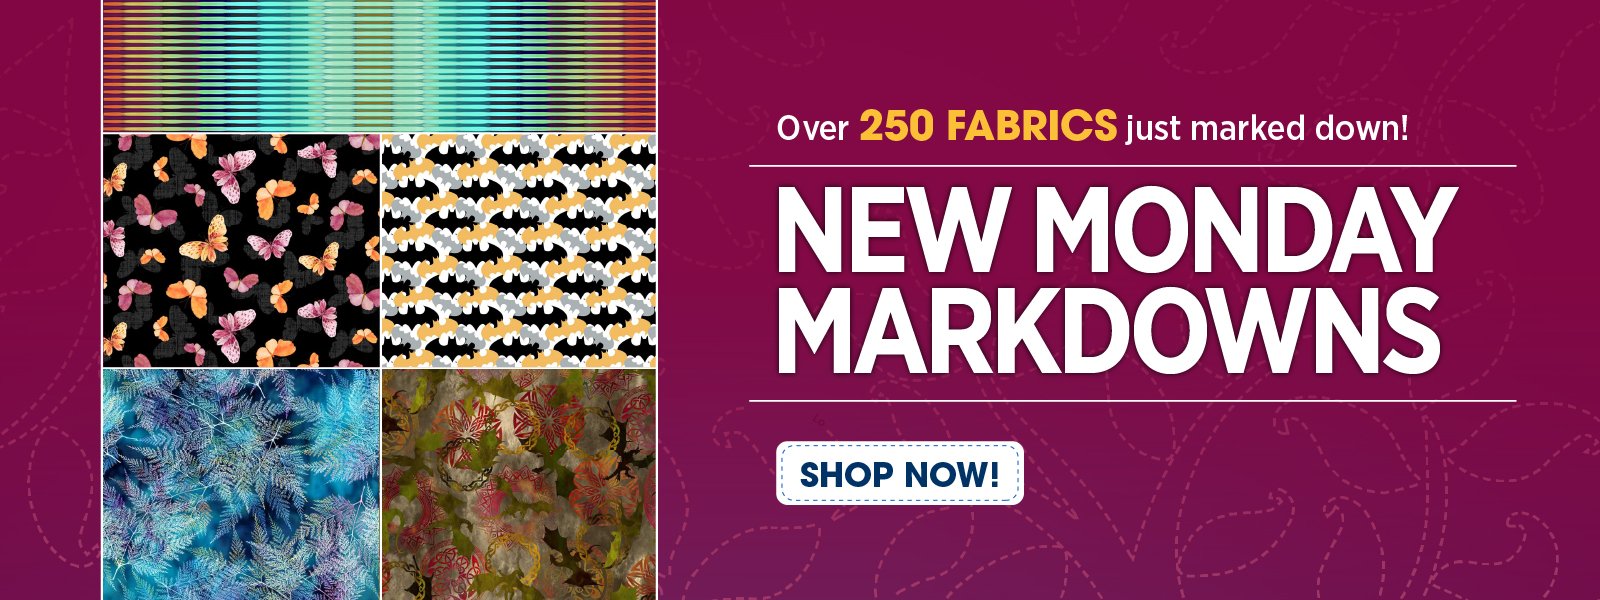 New Monday Markdowns!  Deeper discounts and over 250 fabrics just marked down!!